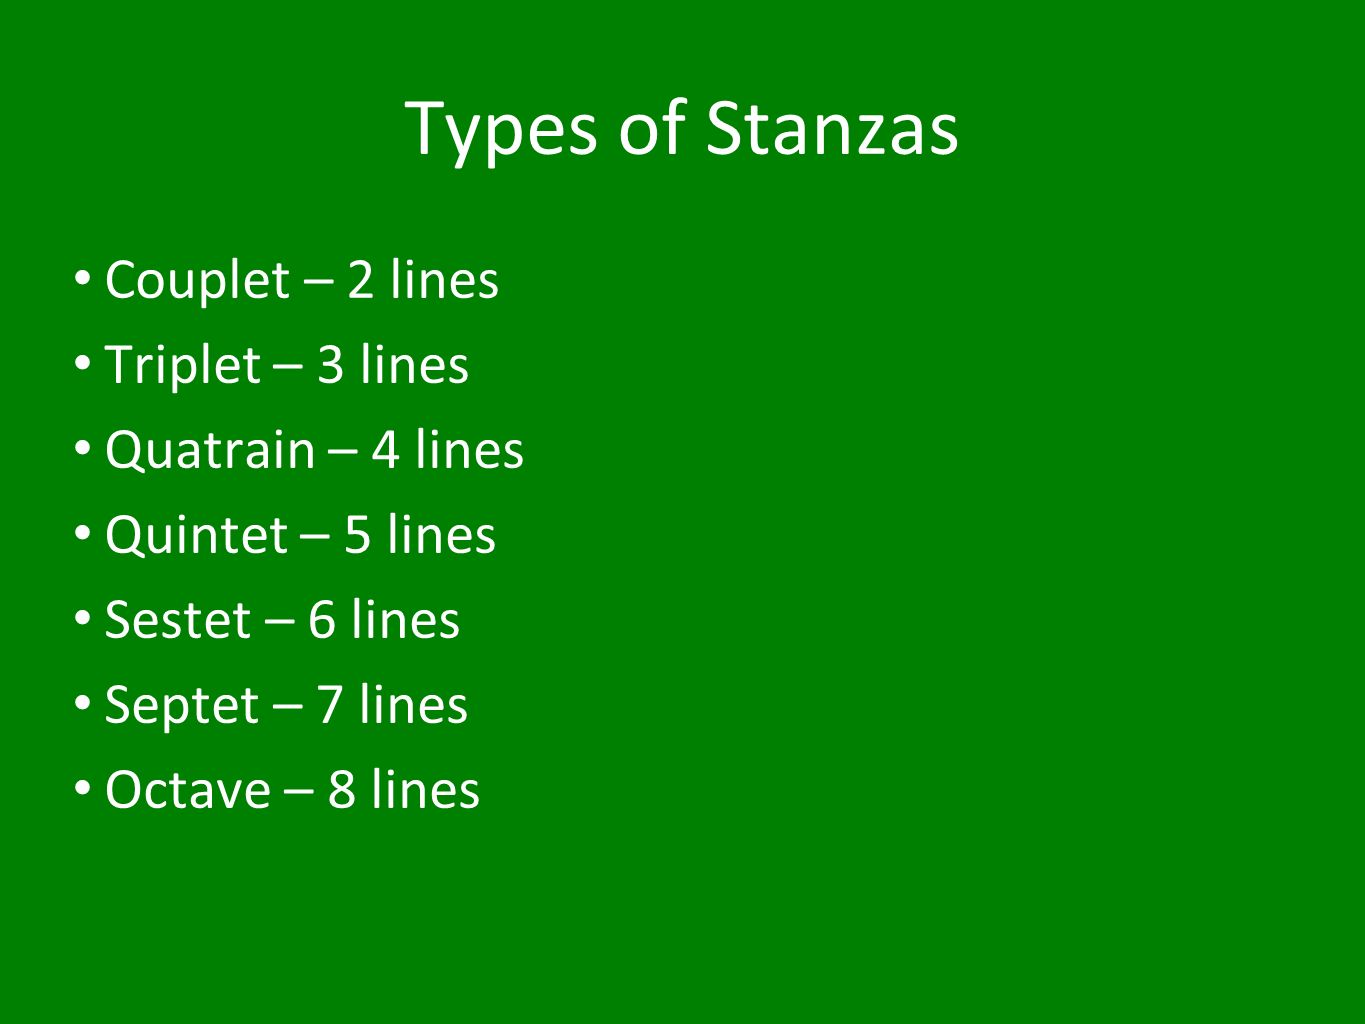 Types of Stanzas Couplet – 2 lines Triplet – 3 lines Quatrain – 4 lines Quintet – 5 lines Sestet – 6 lines Septet – 7 lines Octave – 8 lines